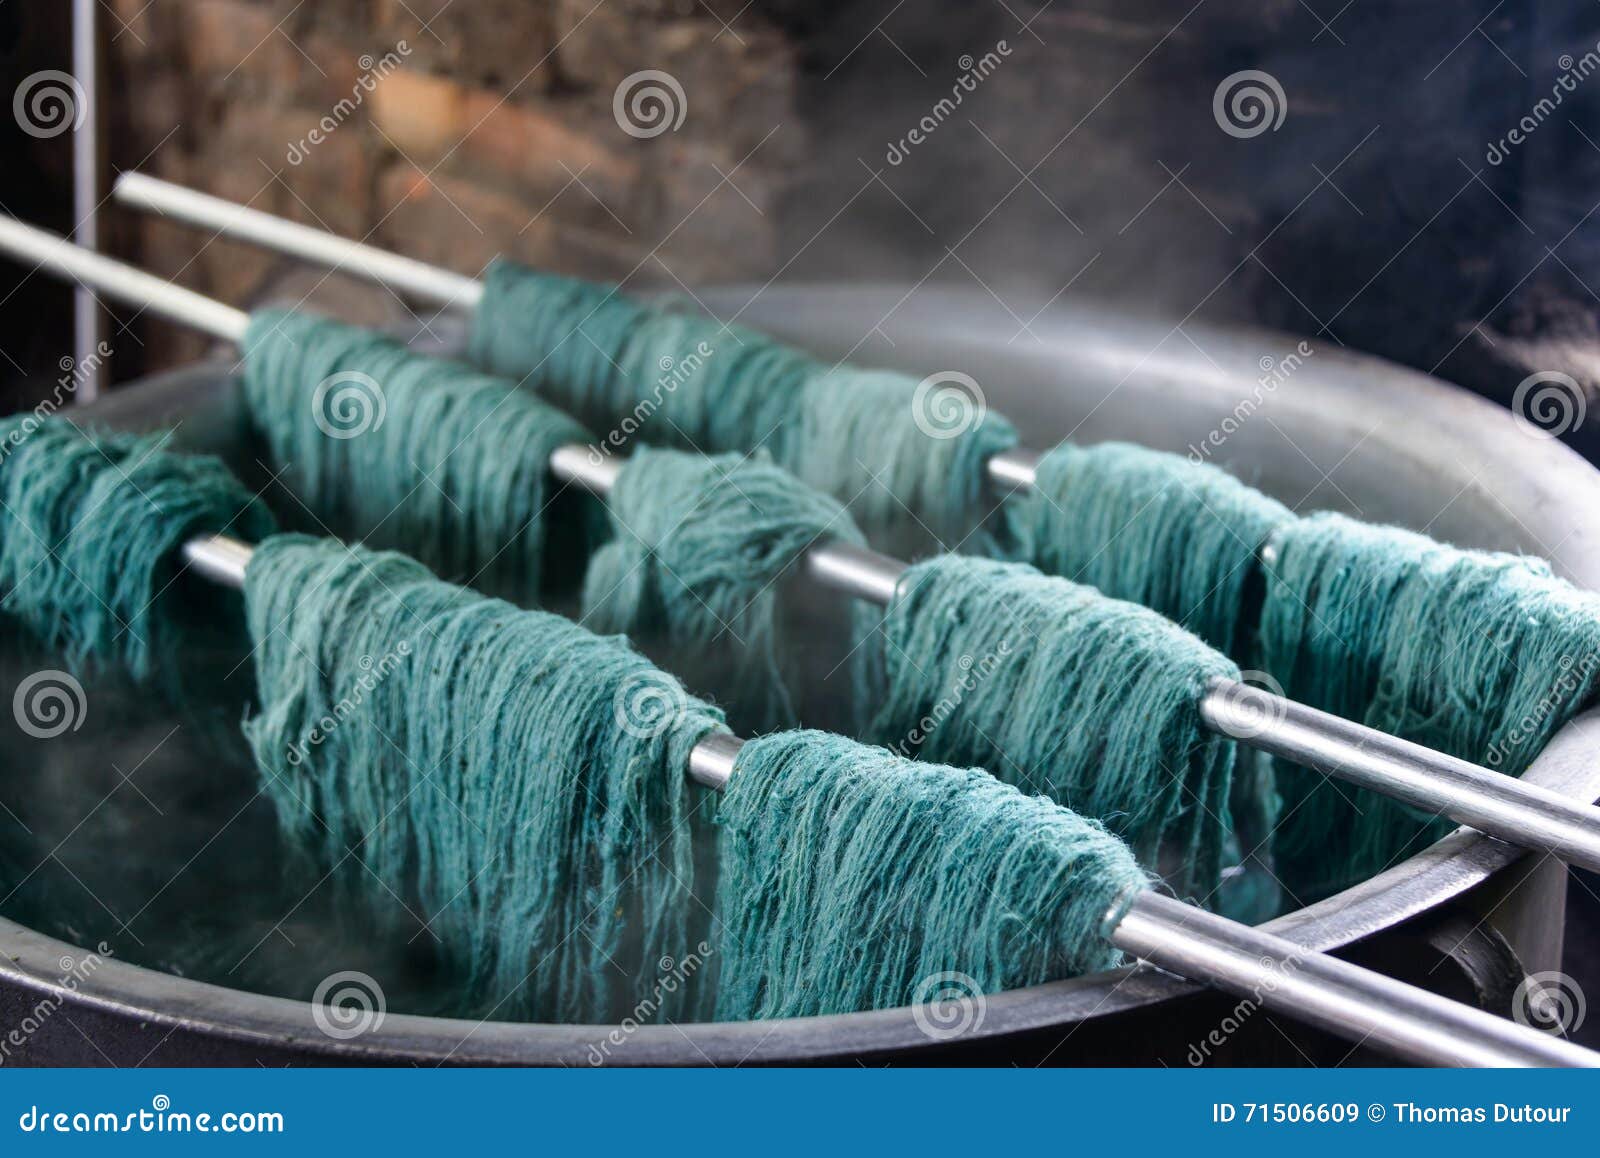 traditional wool dyeing